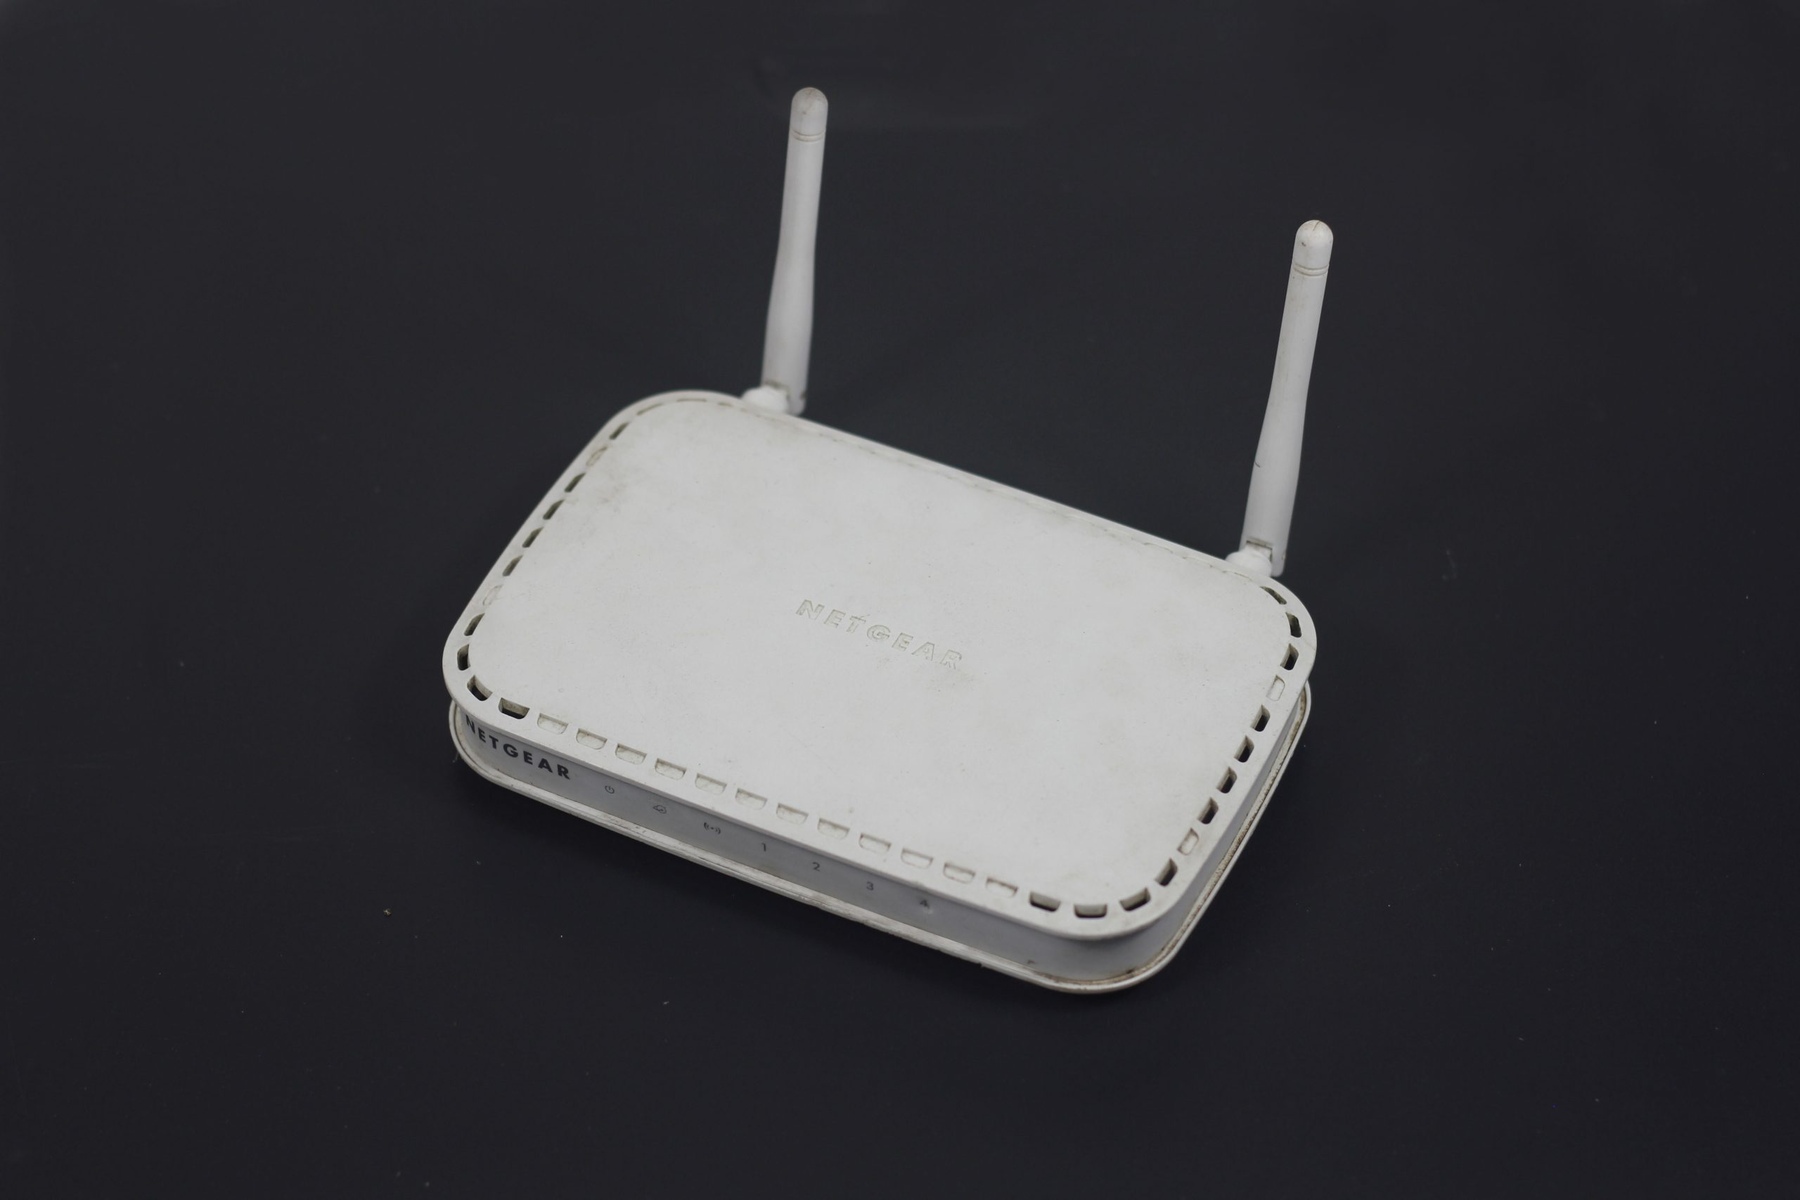 How To Connect A Netgear N300 Wireless Router